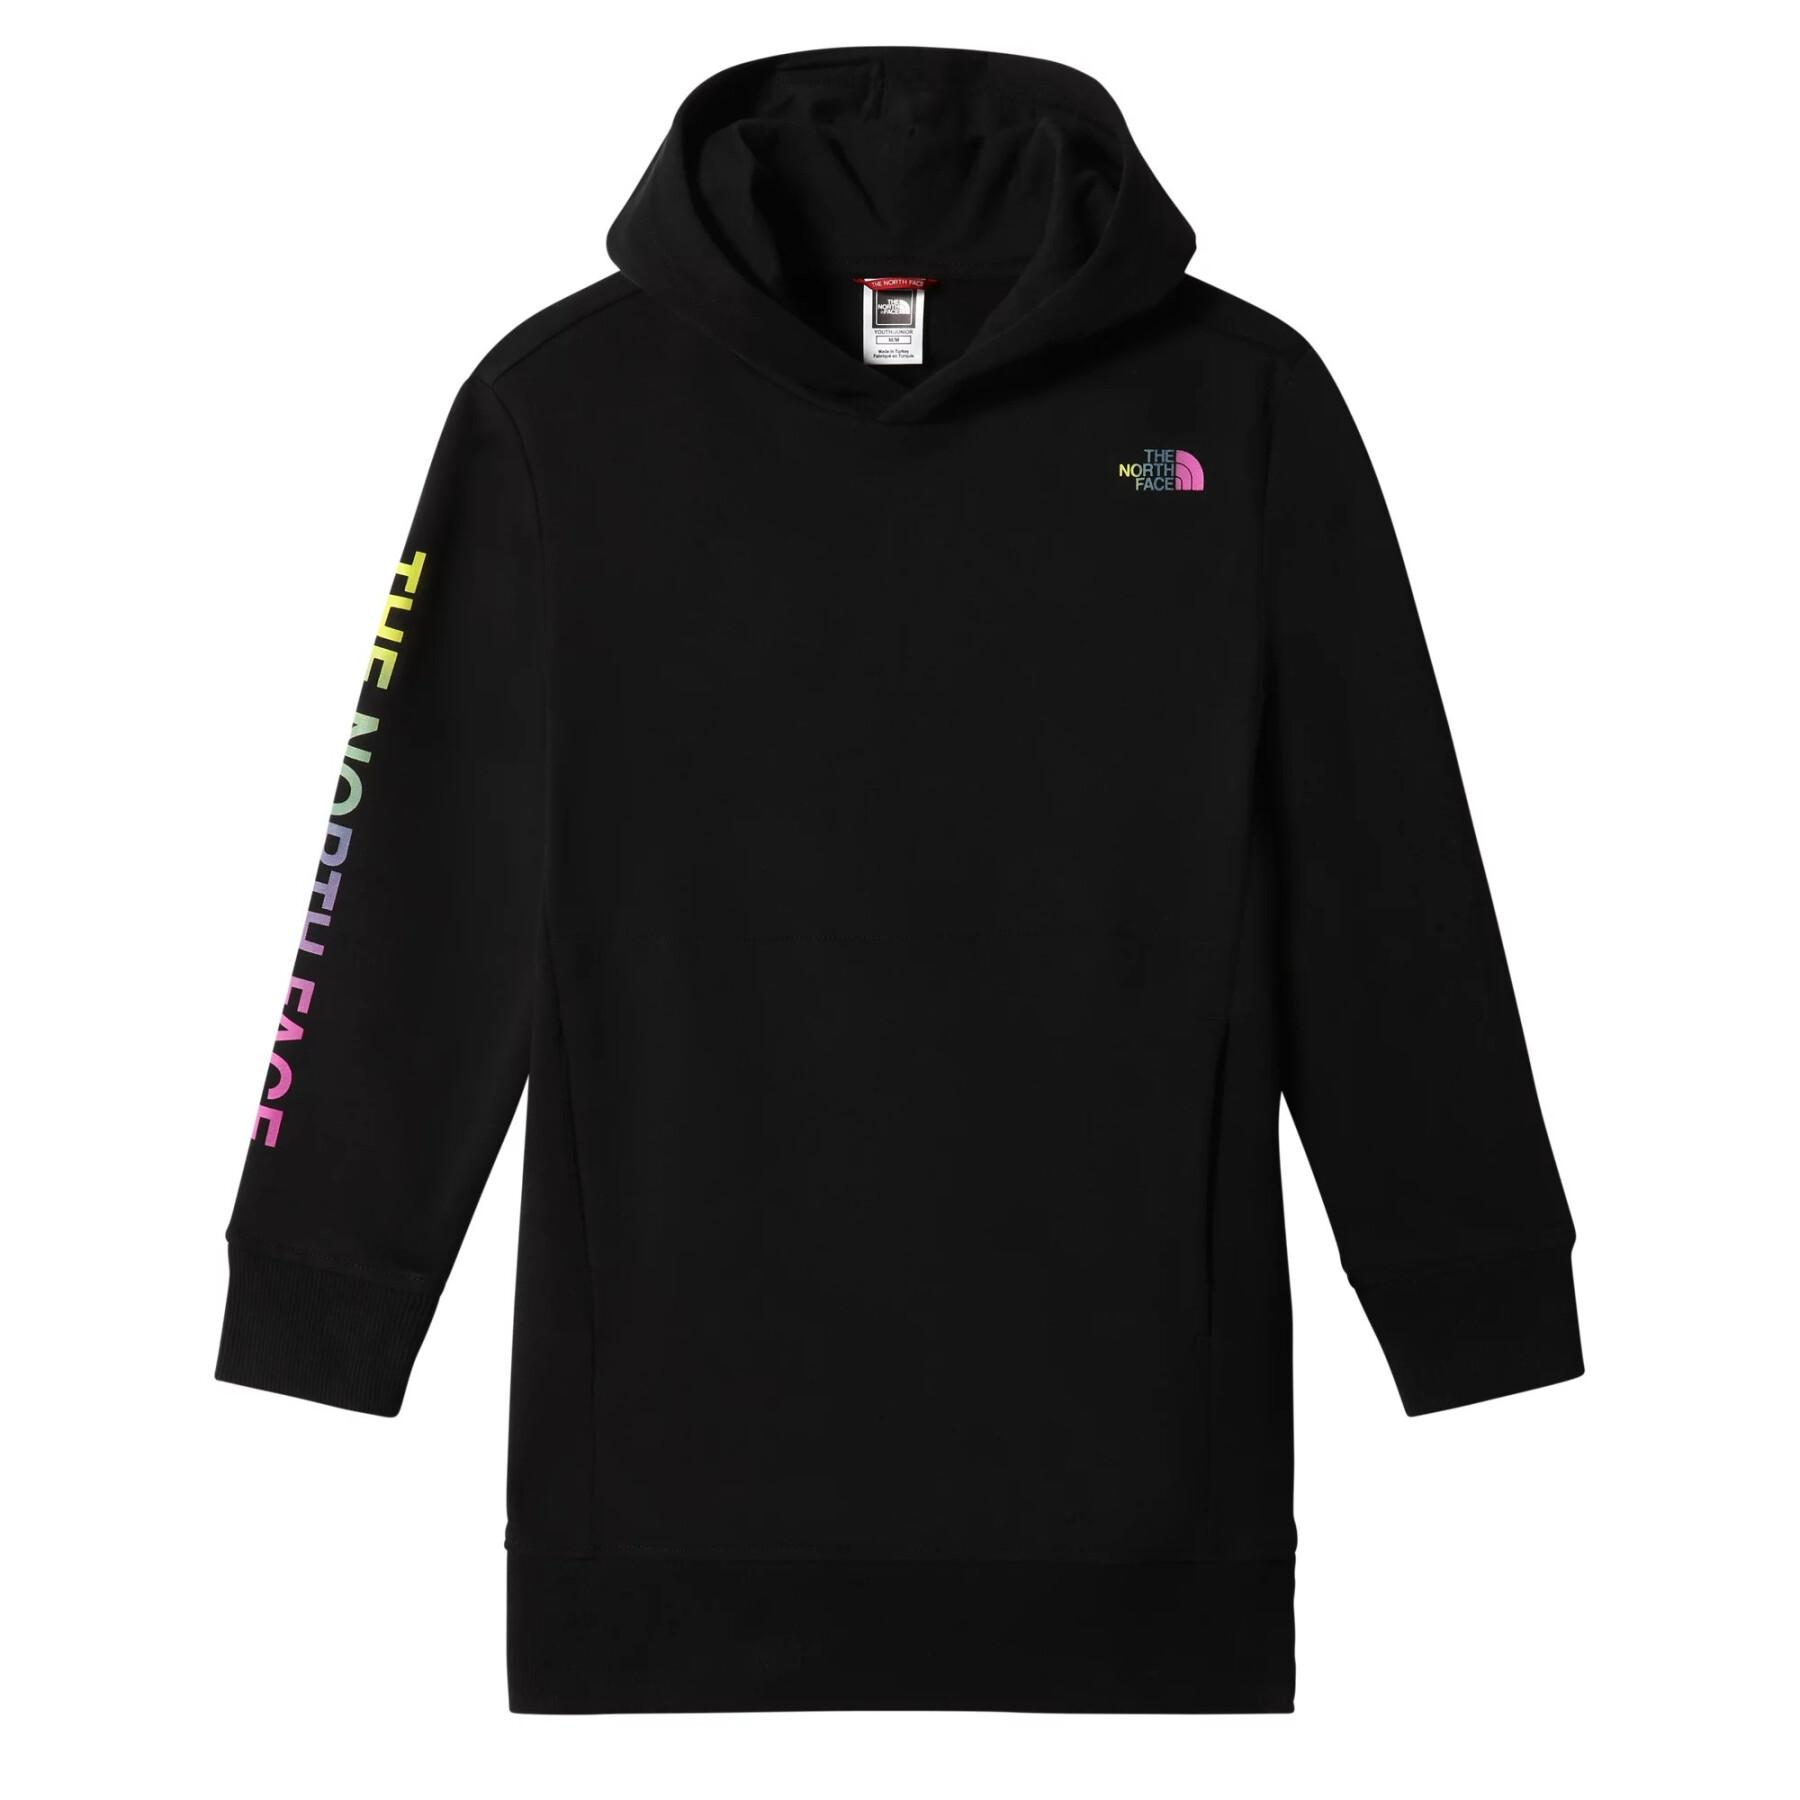 Capuz de menina The North Face Graphic Relaxed